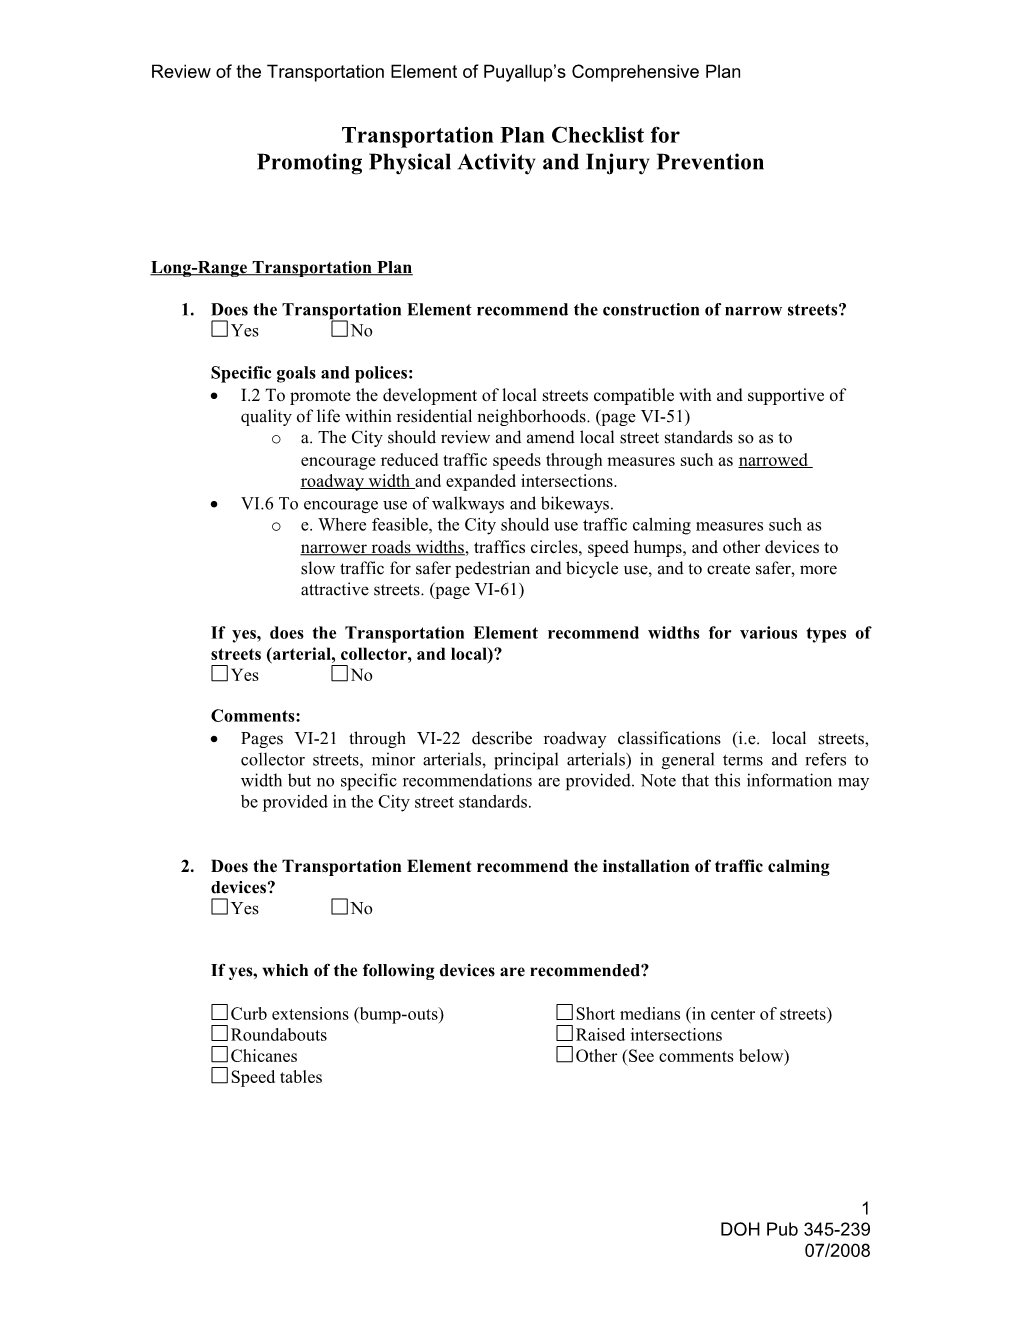 Transportation Plan Checklist Forpromoting Physical Activity and Injury Prevention